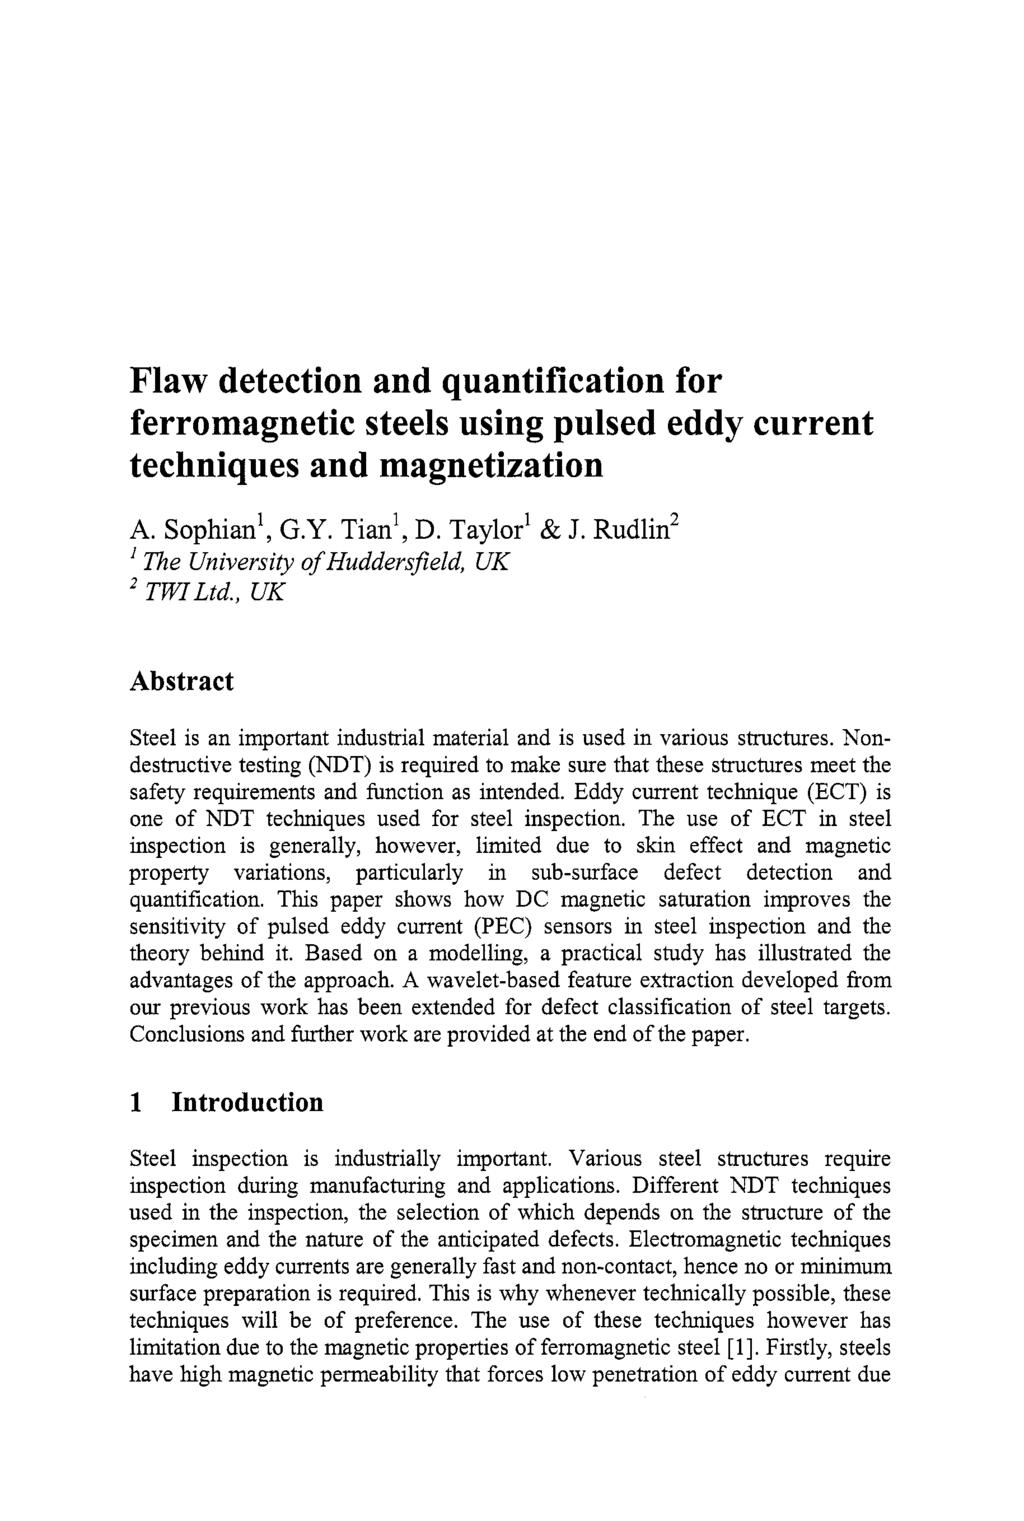 Flaw detection and quantification for ferromagnetic steels using pulsed eddy current techniques and magnetization A. sophian1, G.Y. Tianl, D. Taylorl & J.